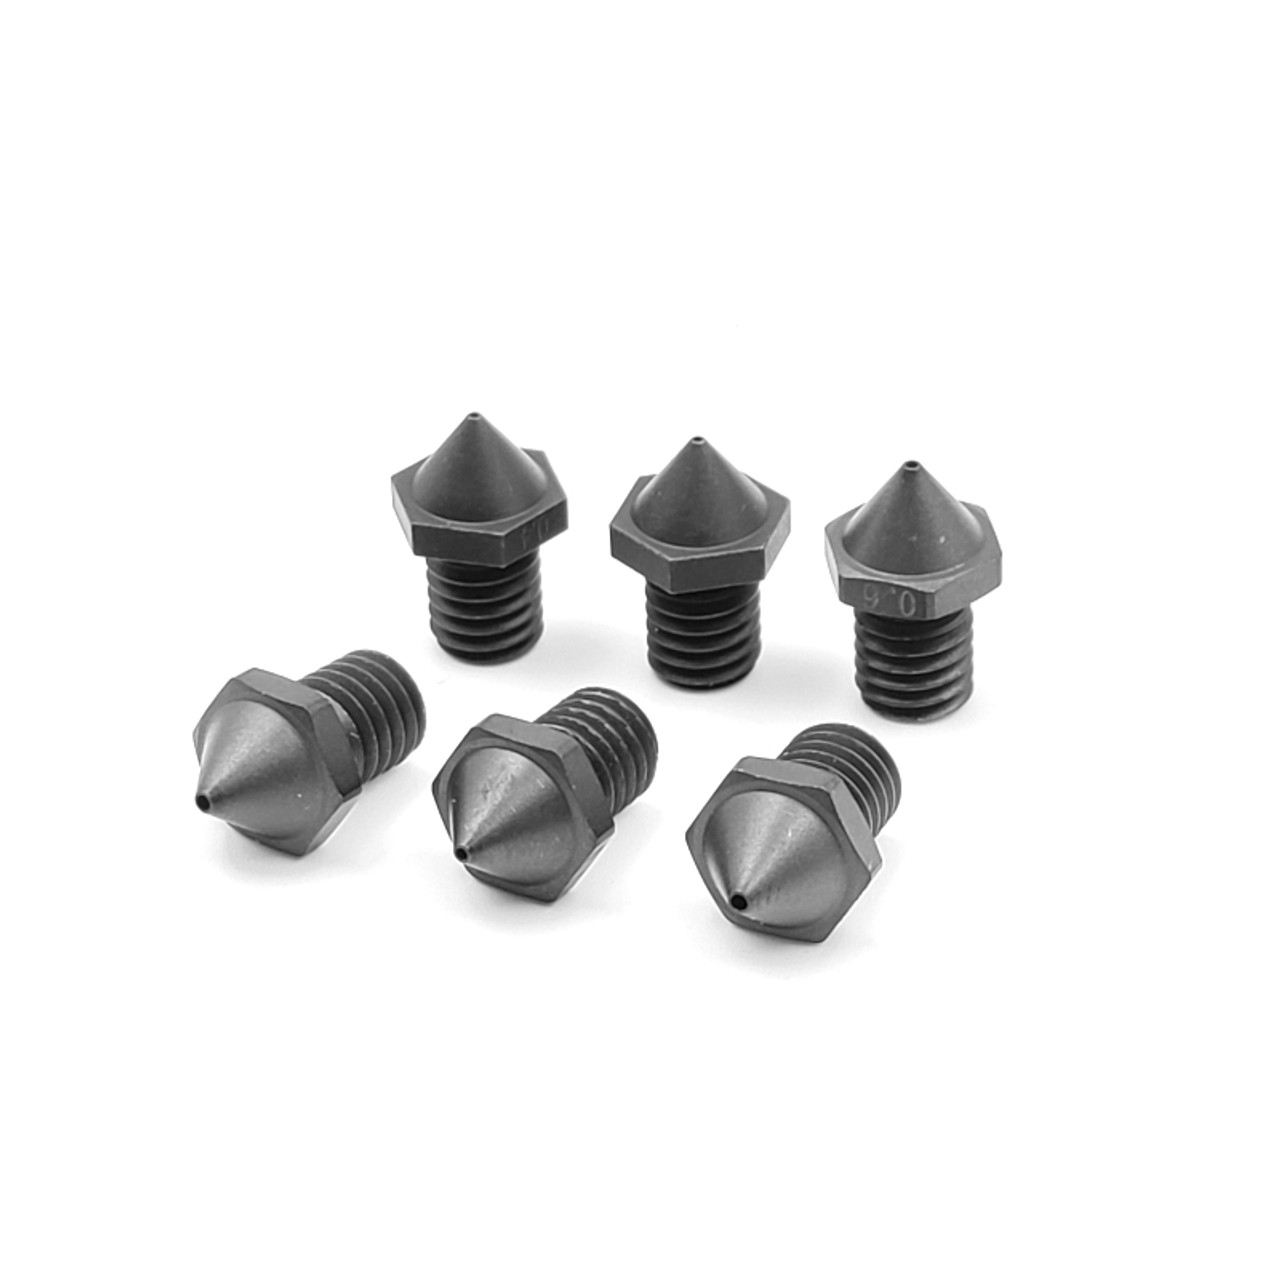 Hardened Steel Nozzle for Guider 3, Creator 3 Pro